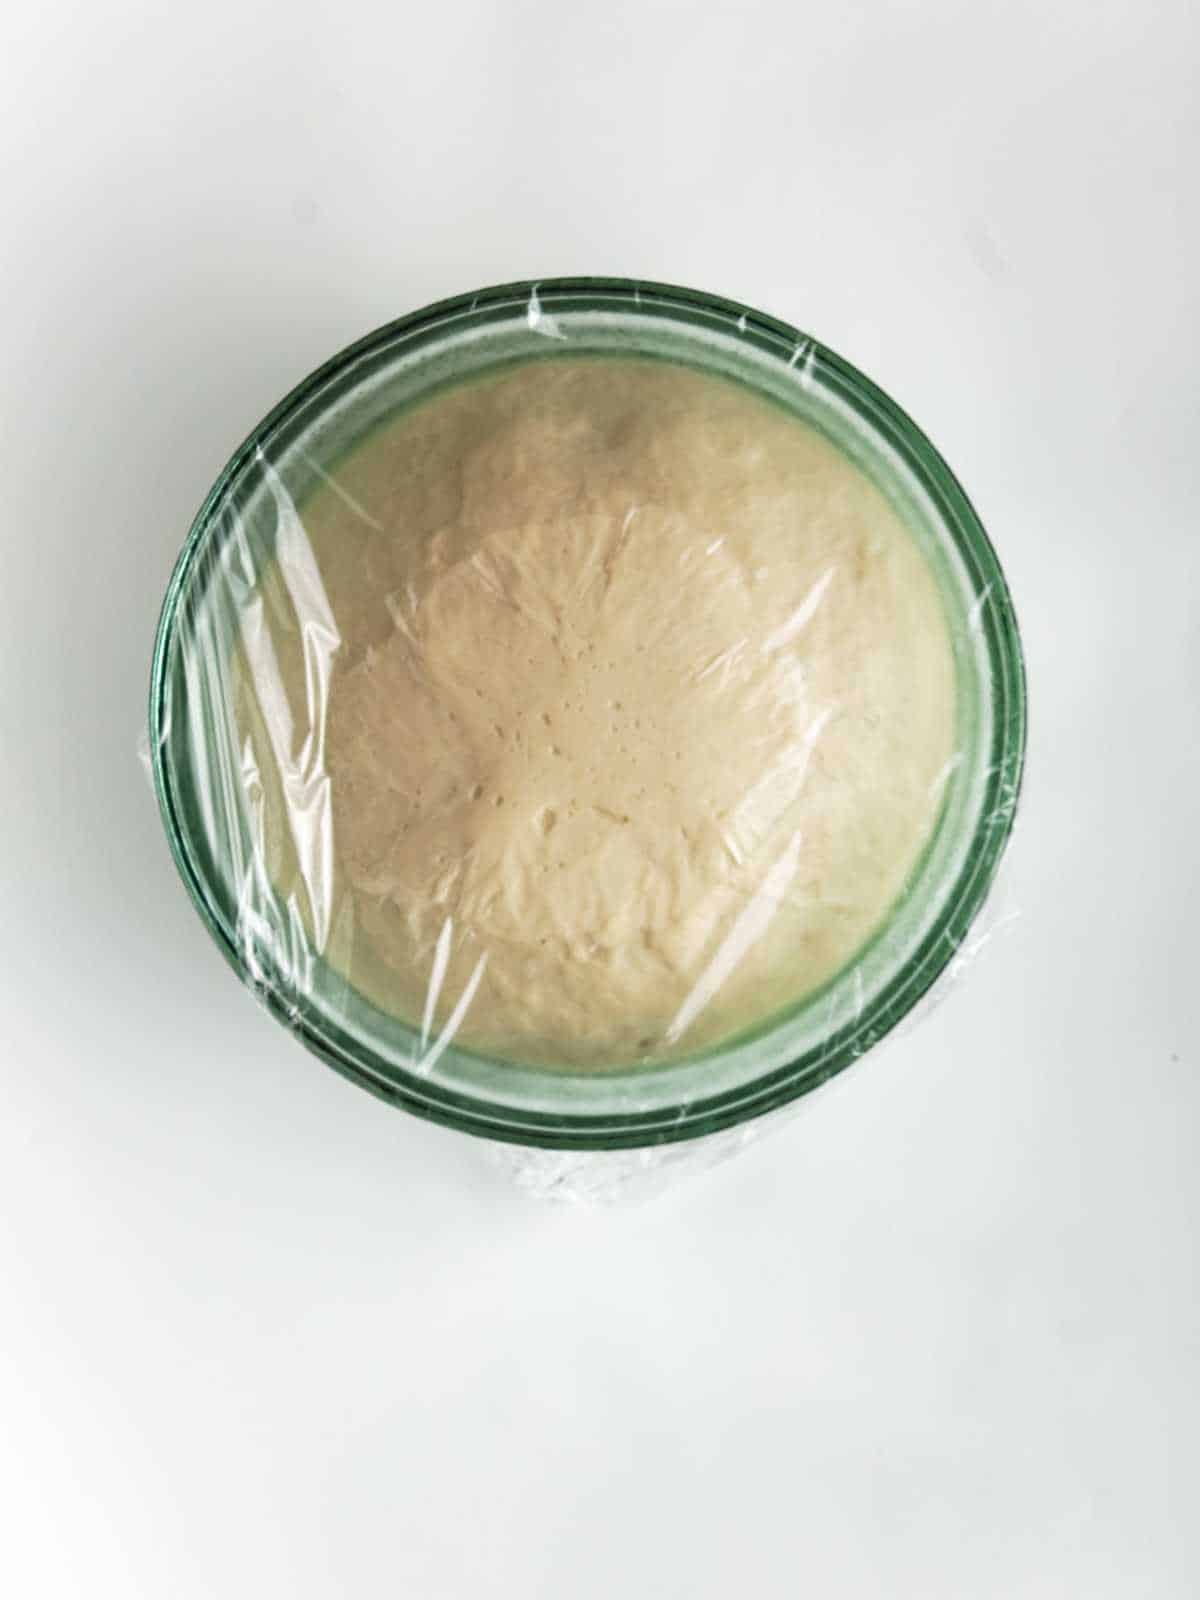 covered bowl of rising yeast dough.